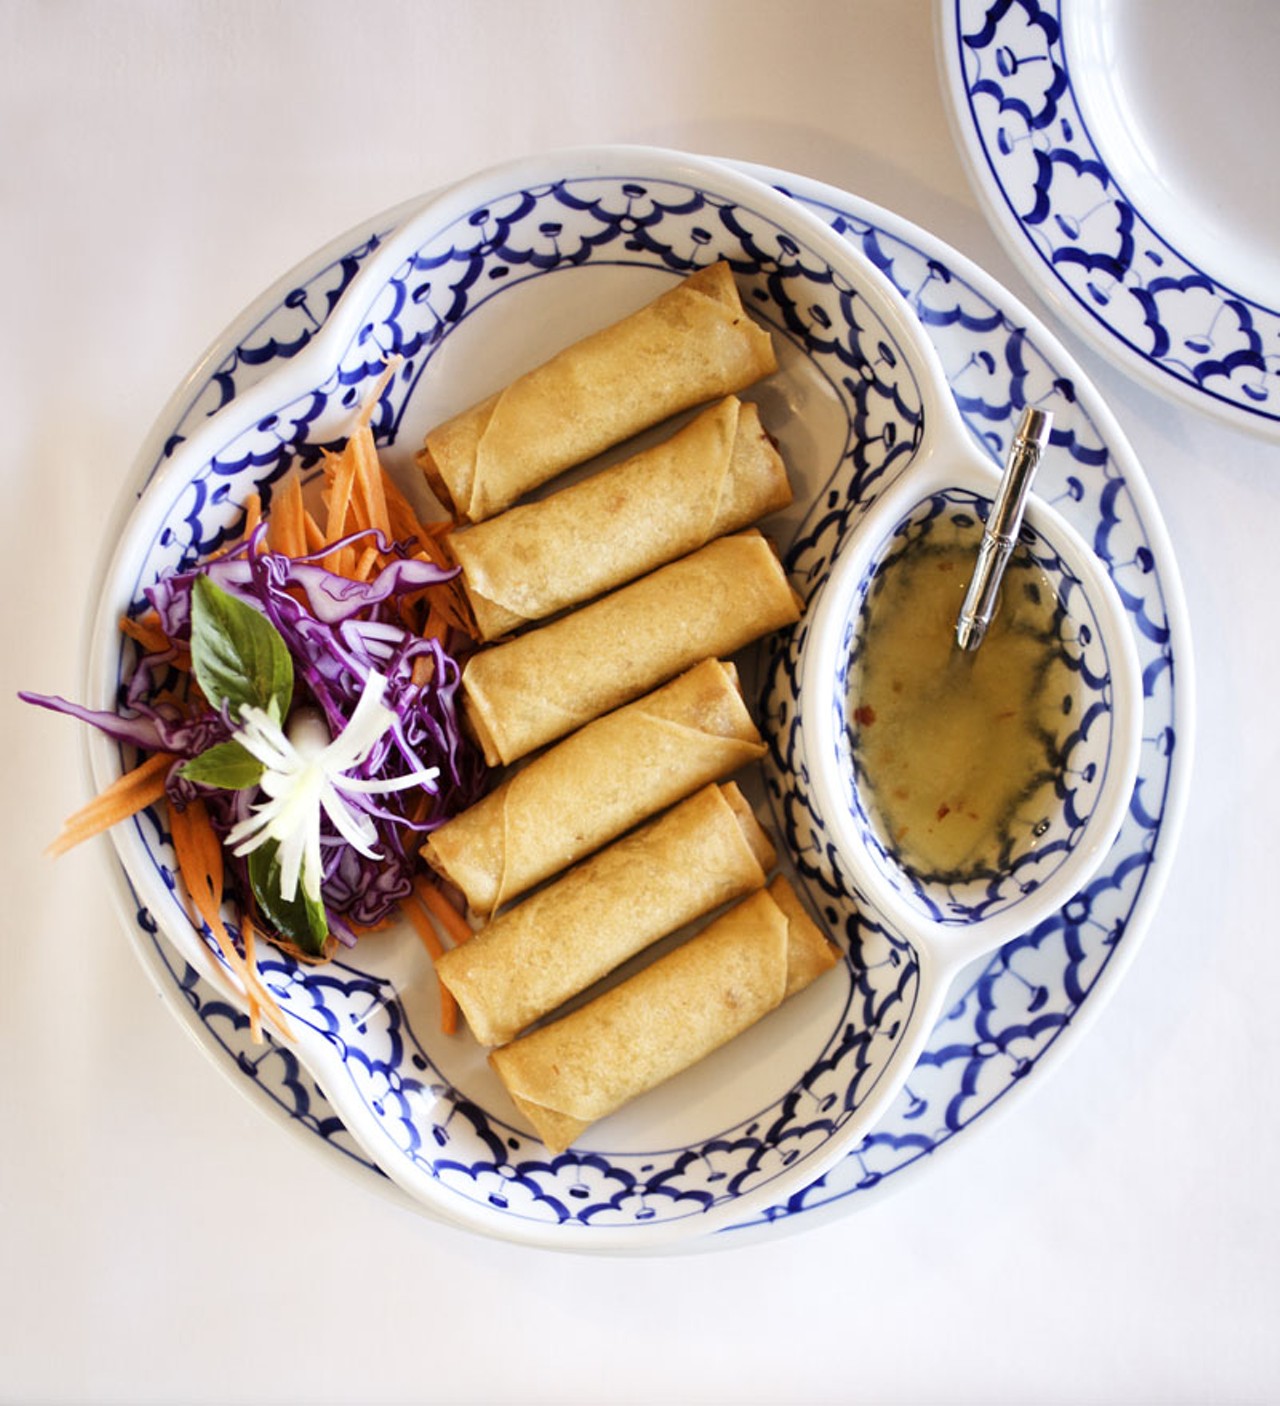 Fried Spring Rolls are prepared with cabbage, carrots, mushrooms, cilantro and glass noodles then wrapped in egg roll wrapper and deep-fried. It is served with sweet and sour sauce.